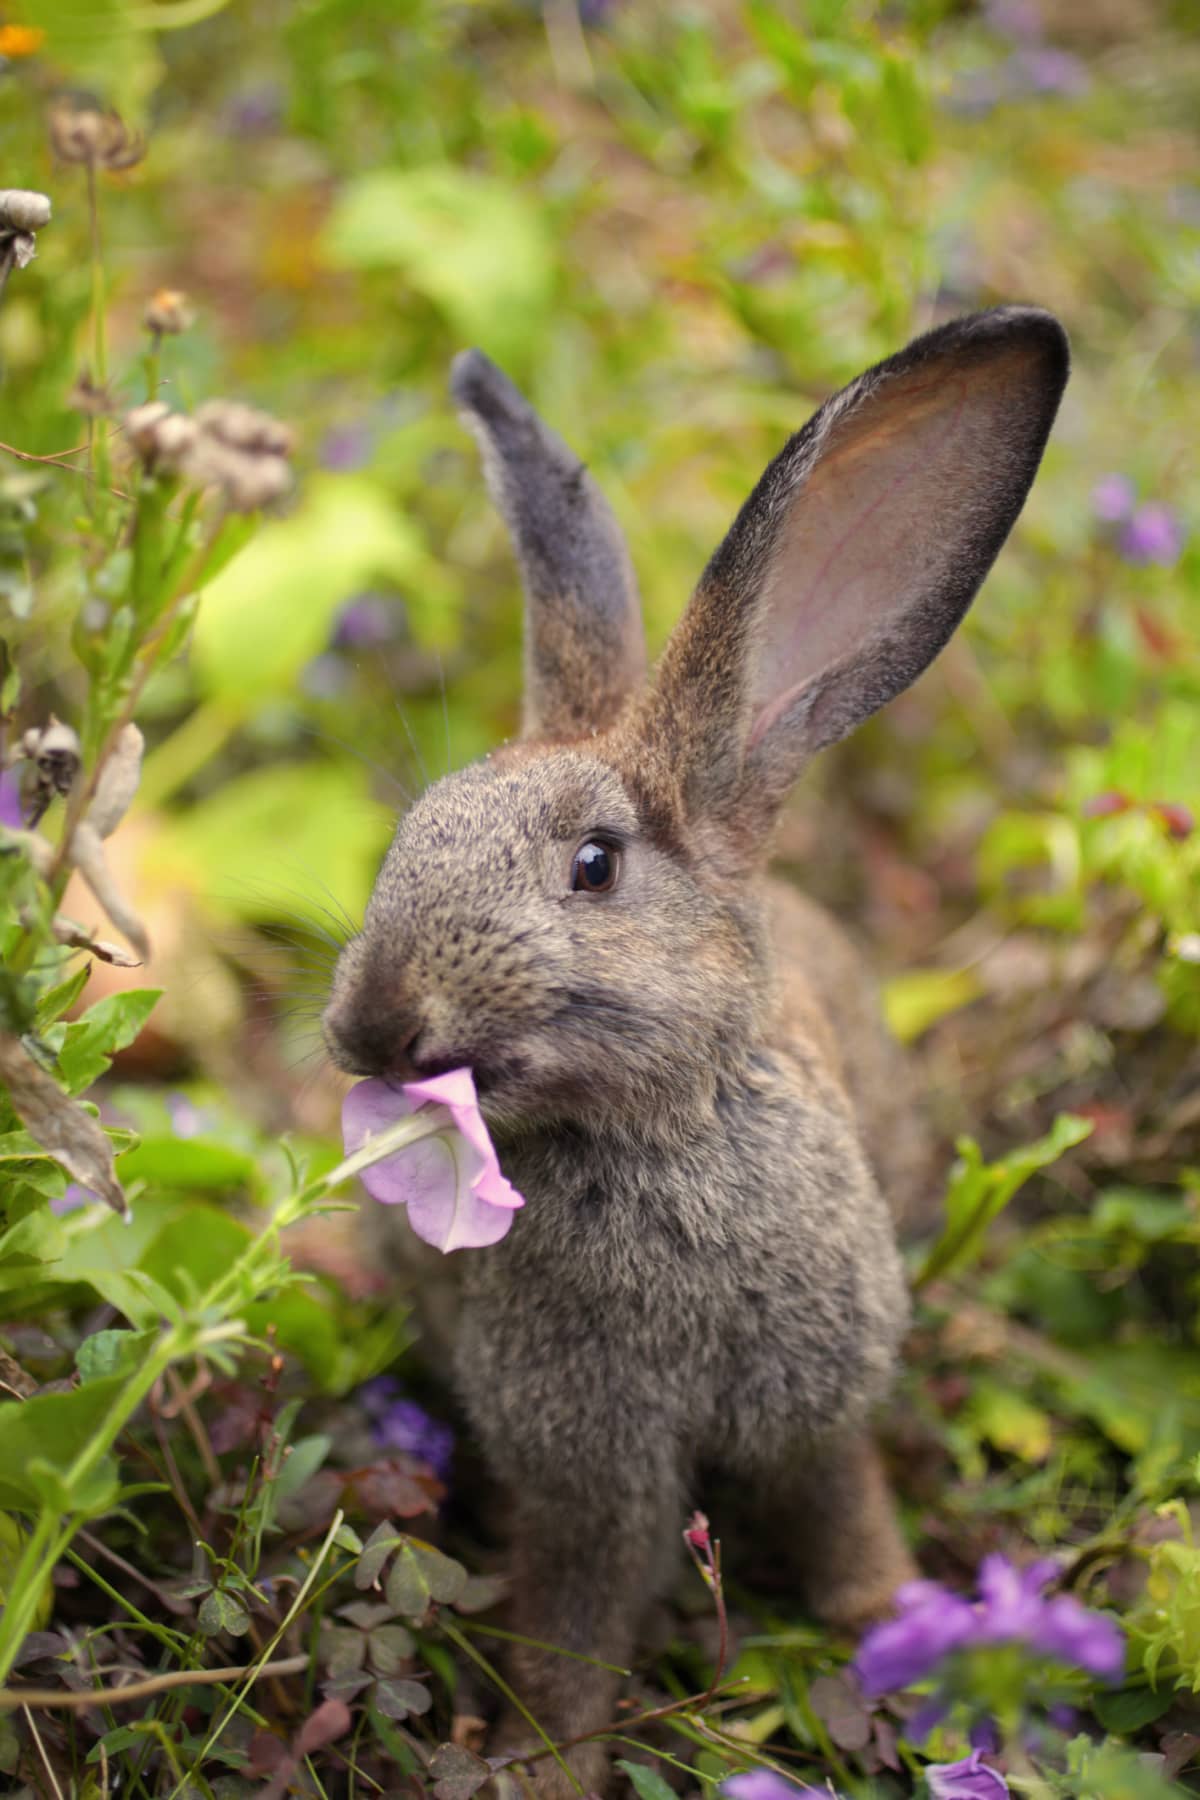 A brown bunny nibbling on a flower